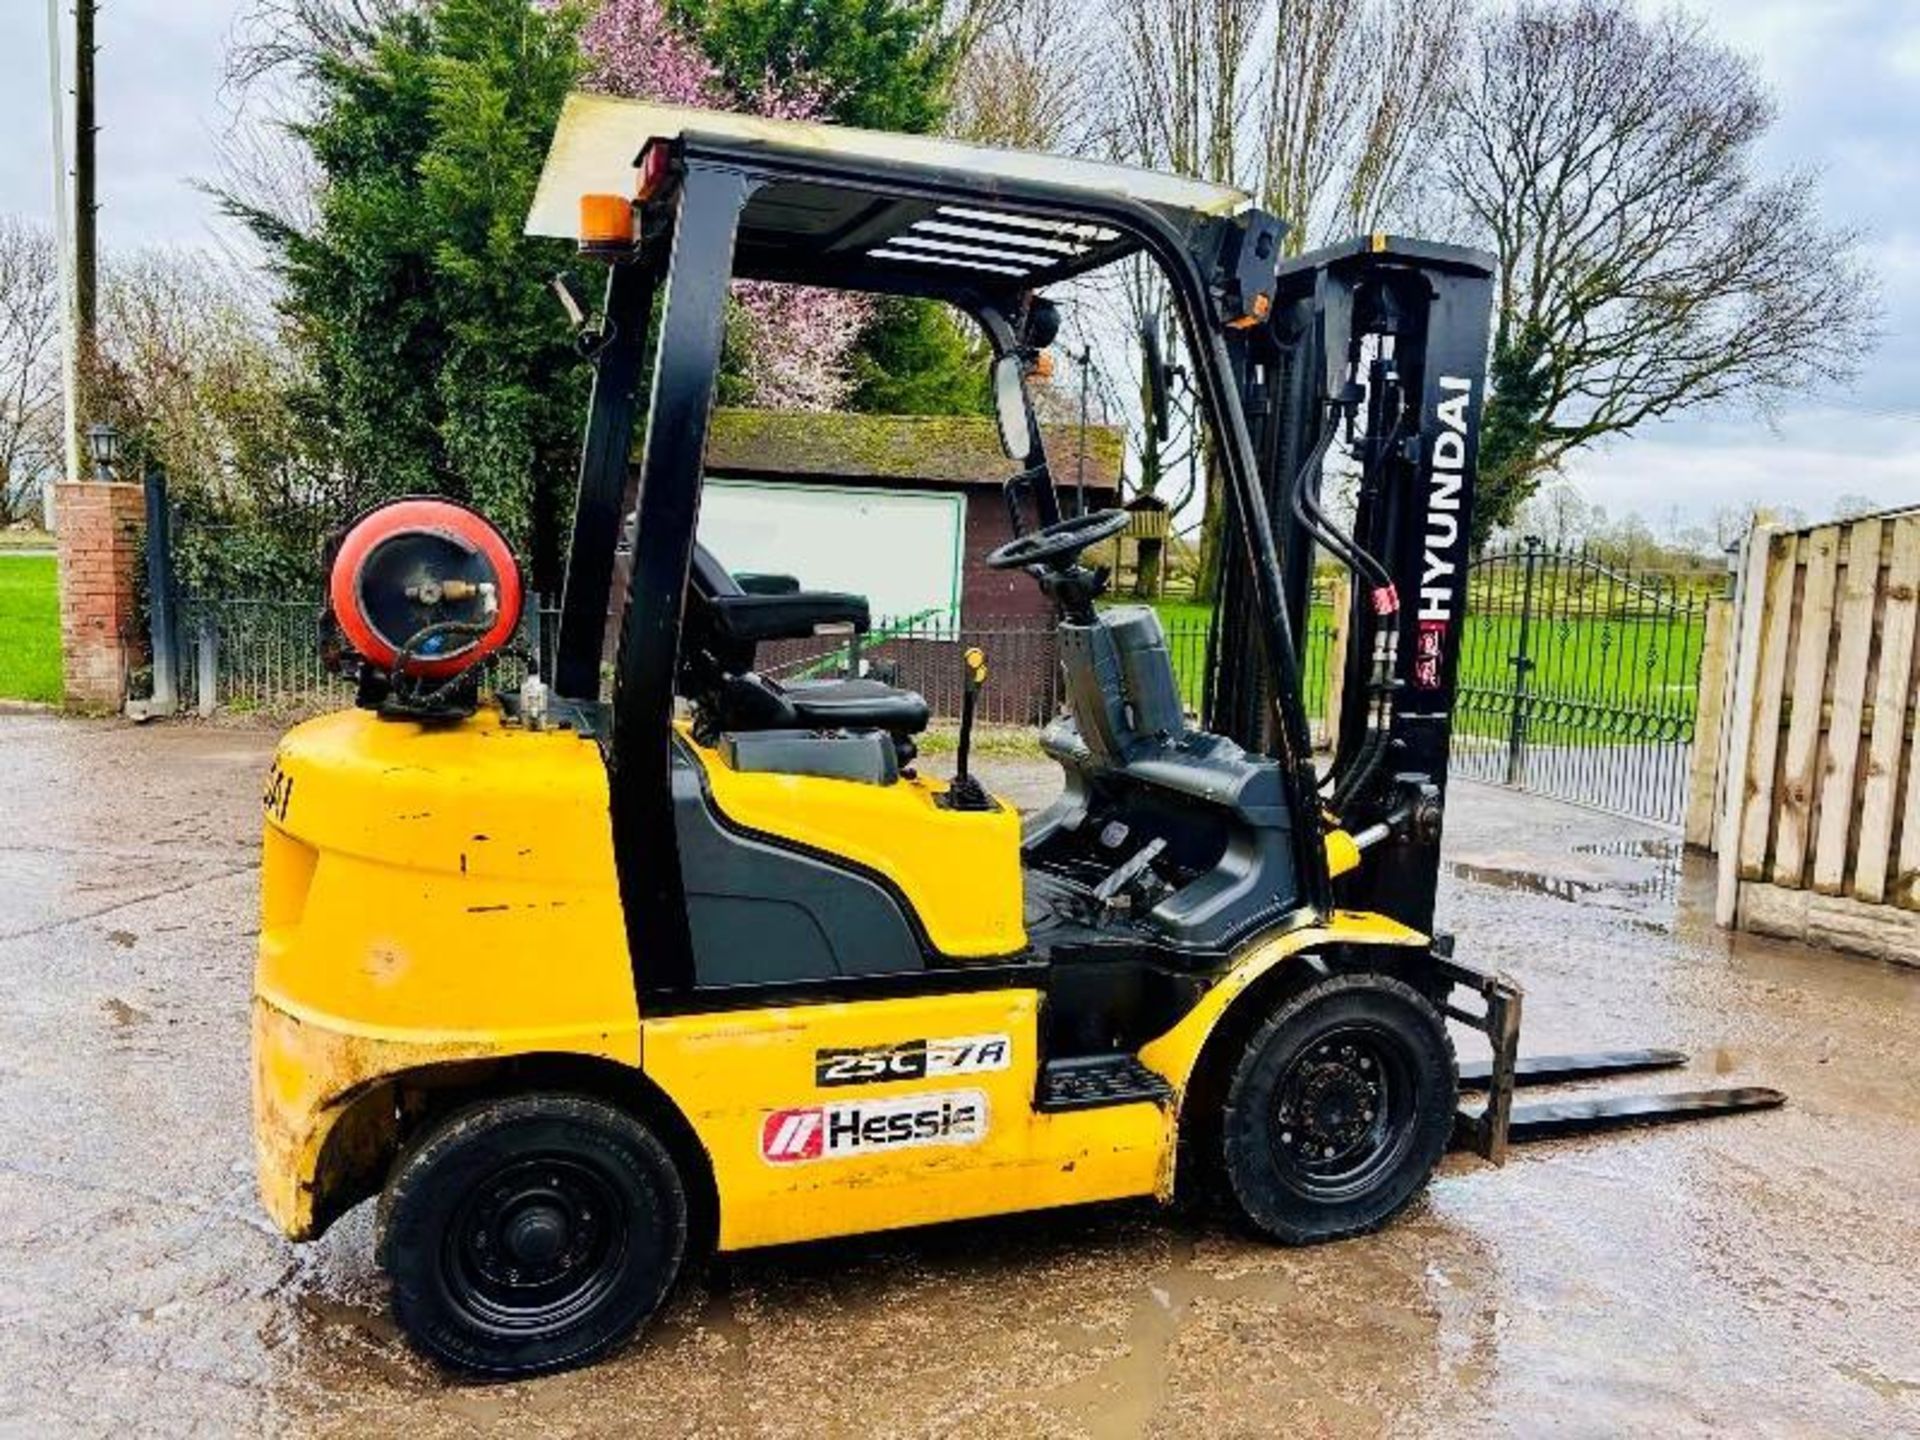 HYUNDAI 25L-7A FORKLIFT *YEAR 2016* C/W PALLET TINES - Image 15 of 15